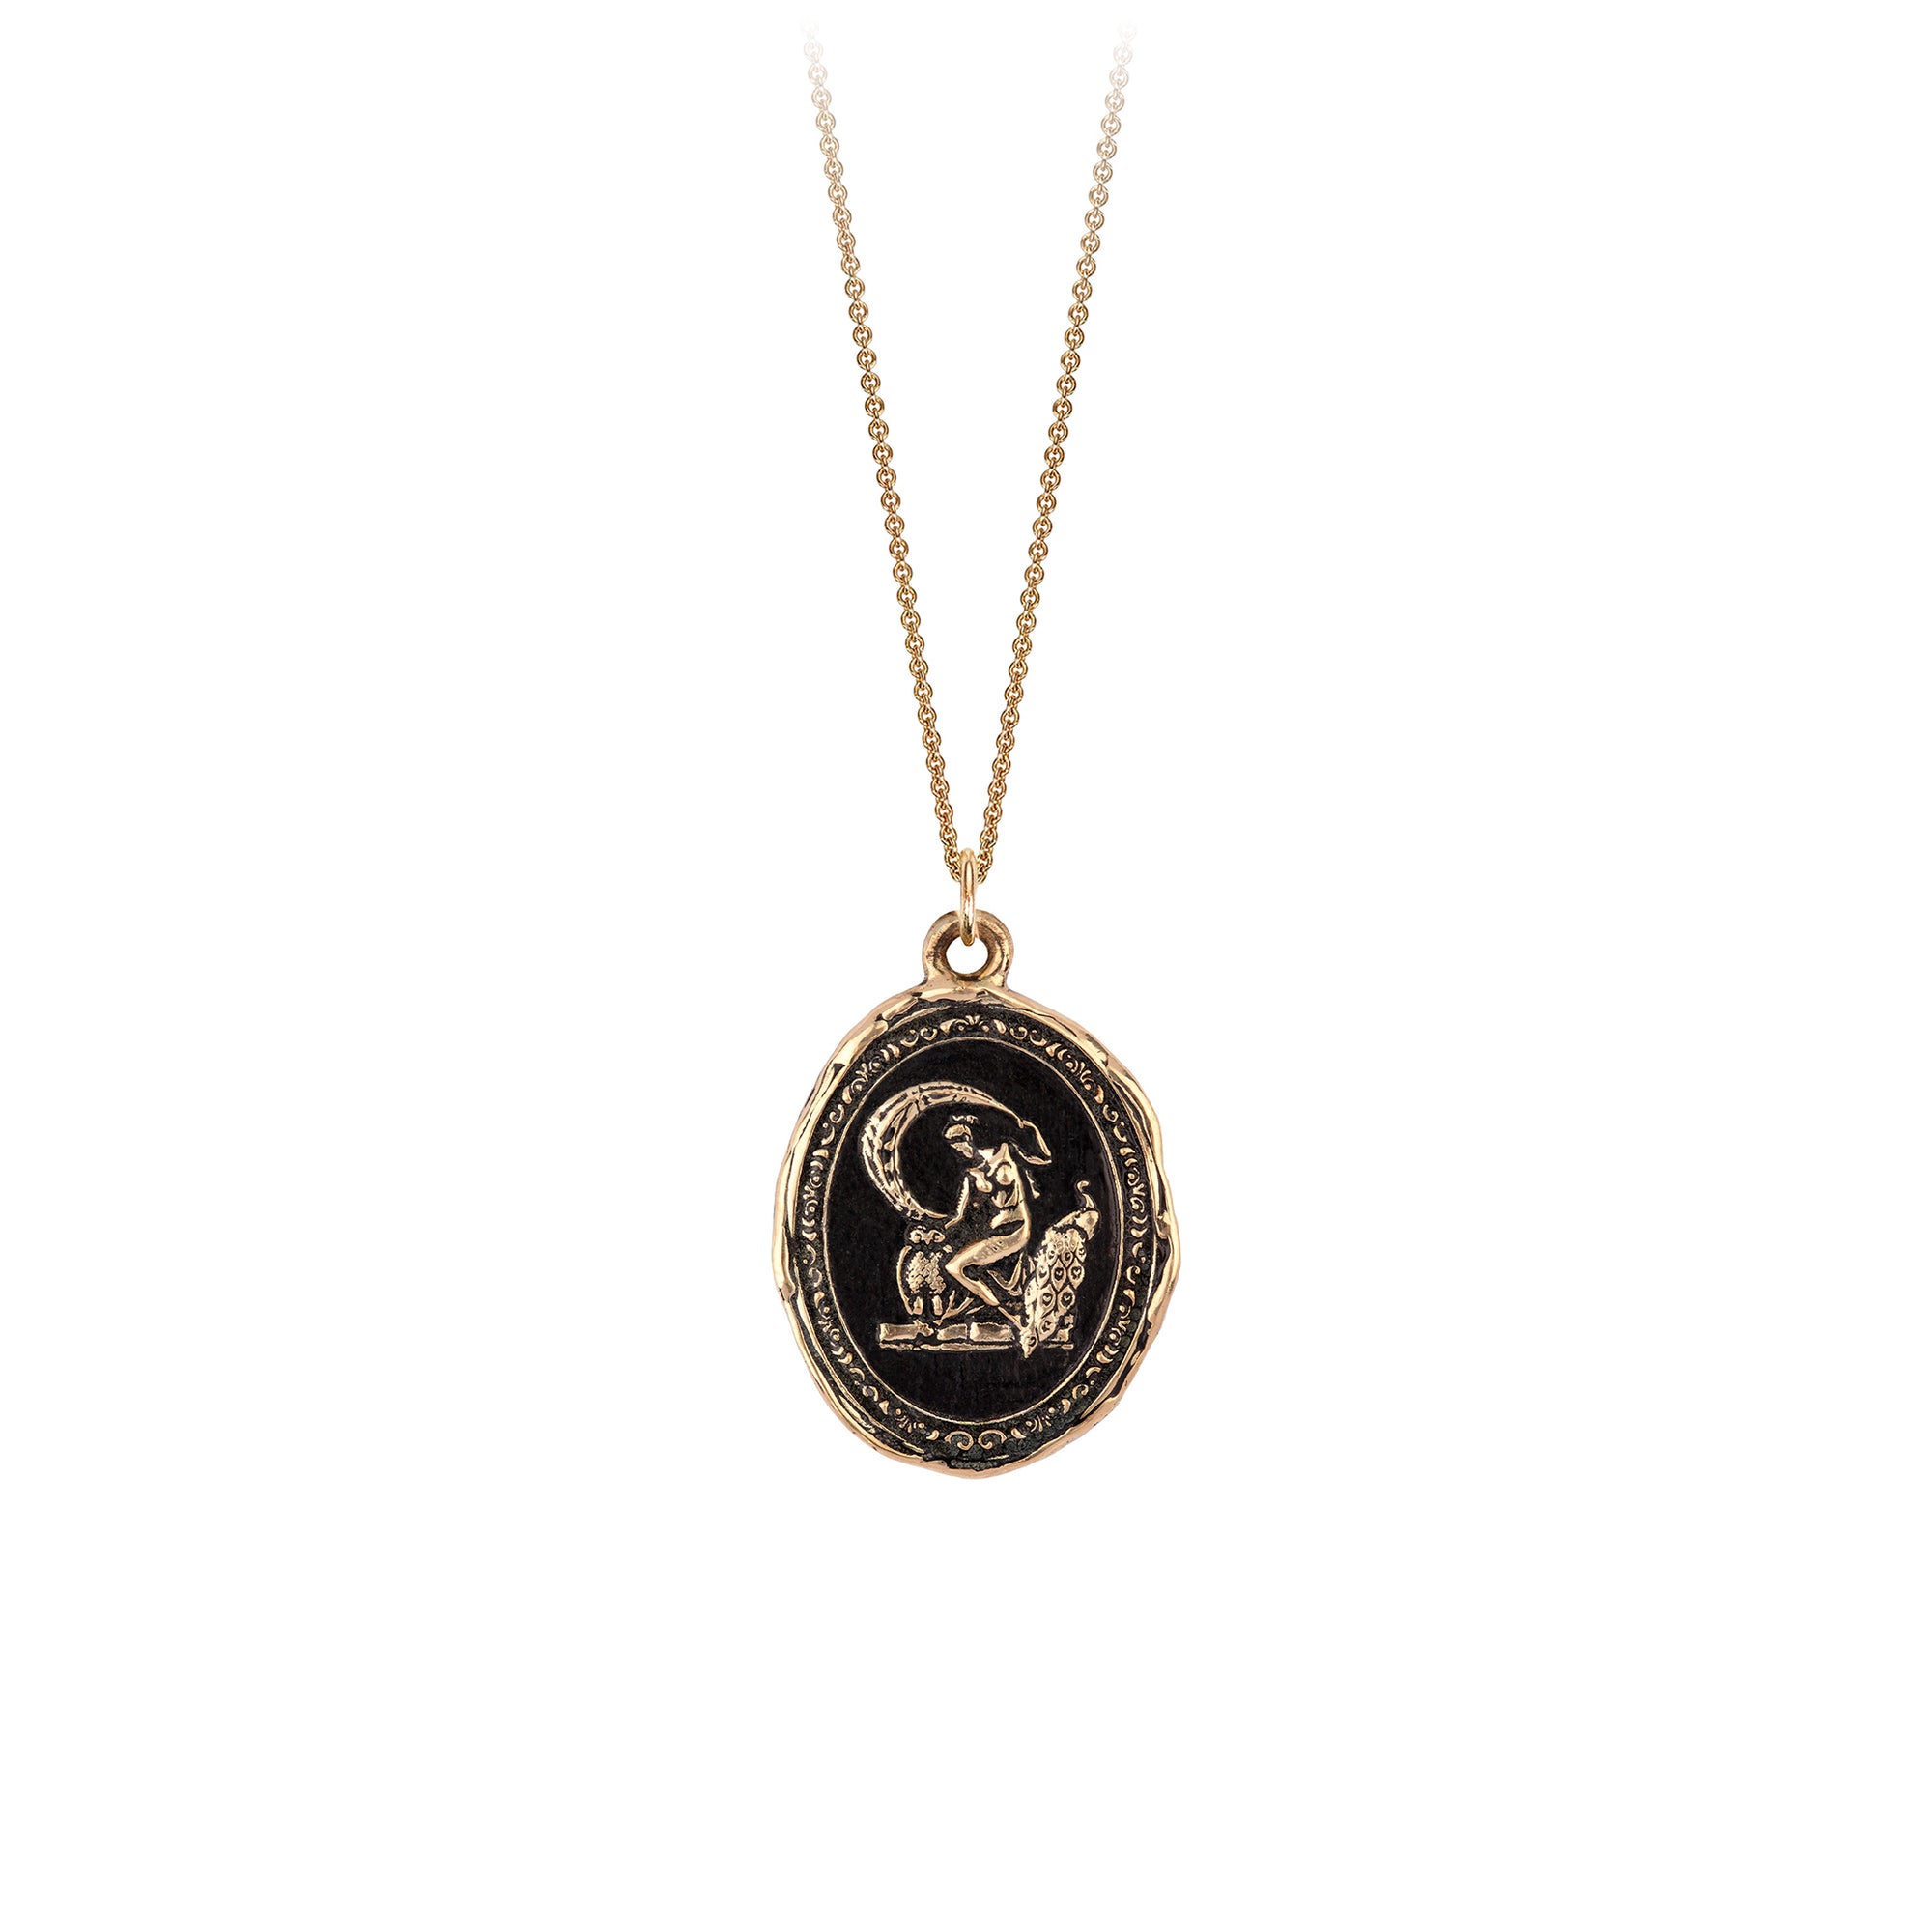 A 14k gold chain featuring our 14k gold Athena goddess talisman.